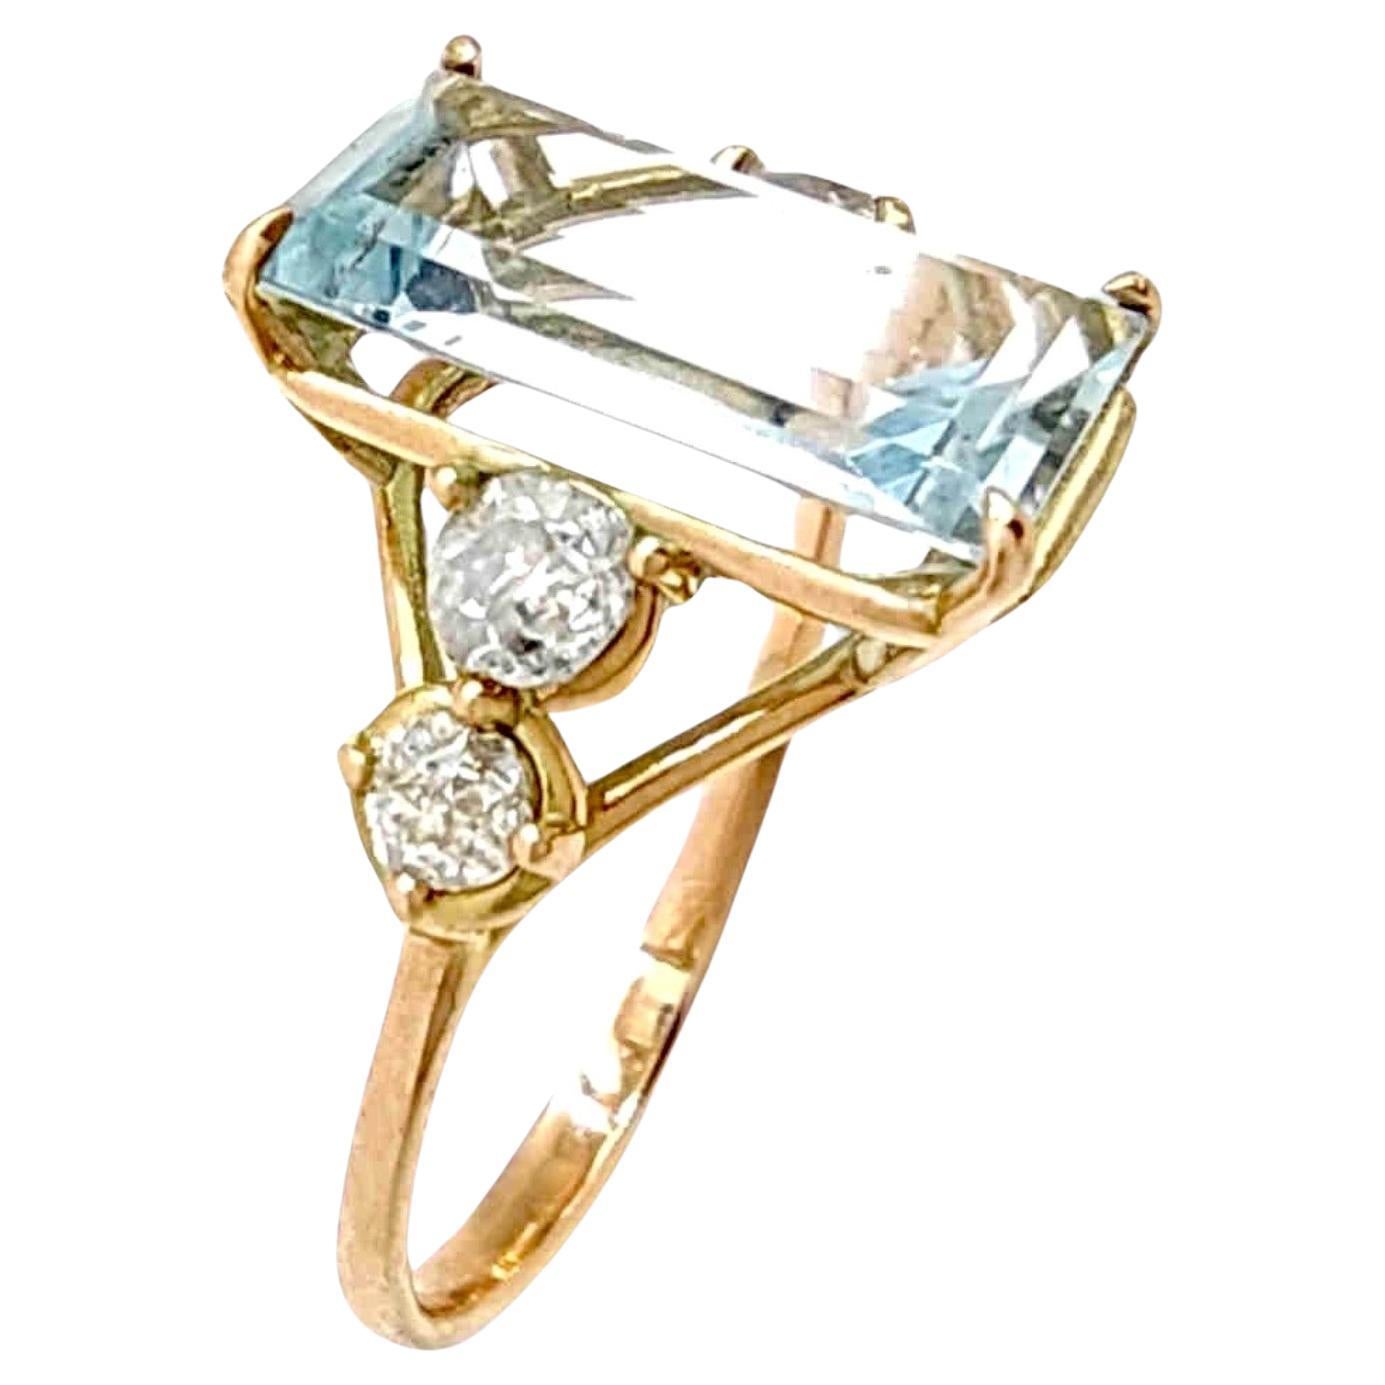 Certified 2.30 carats Aquamarine Engagement Ring - 14k Gold with Diamonds For Sale